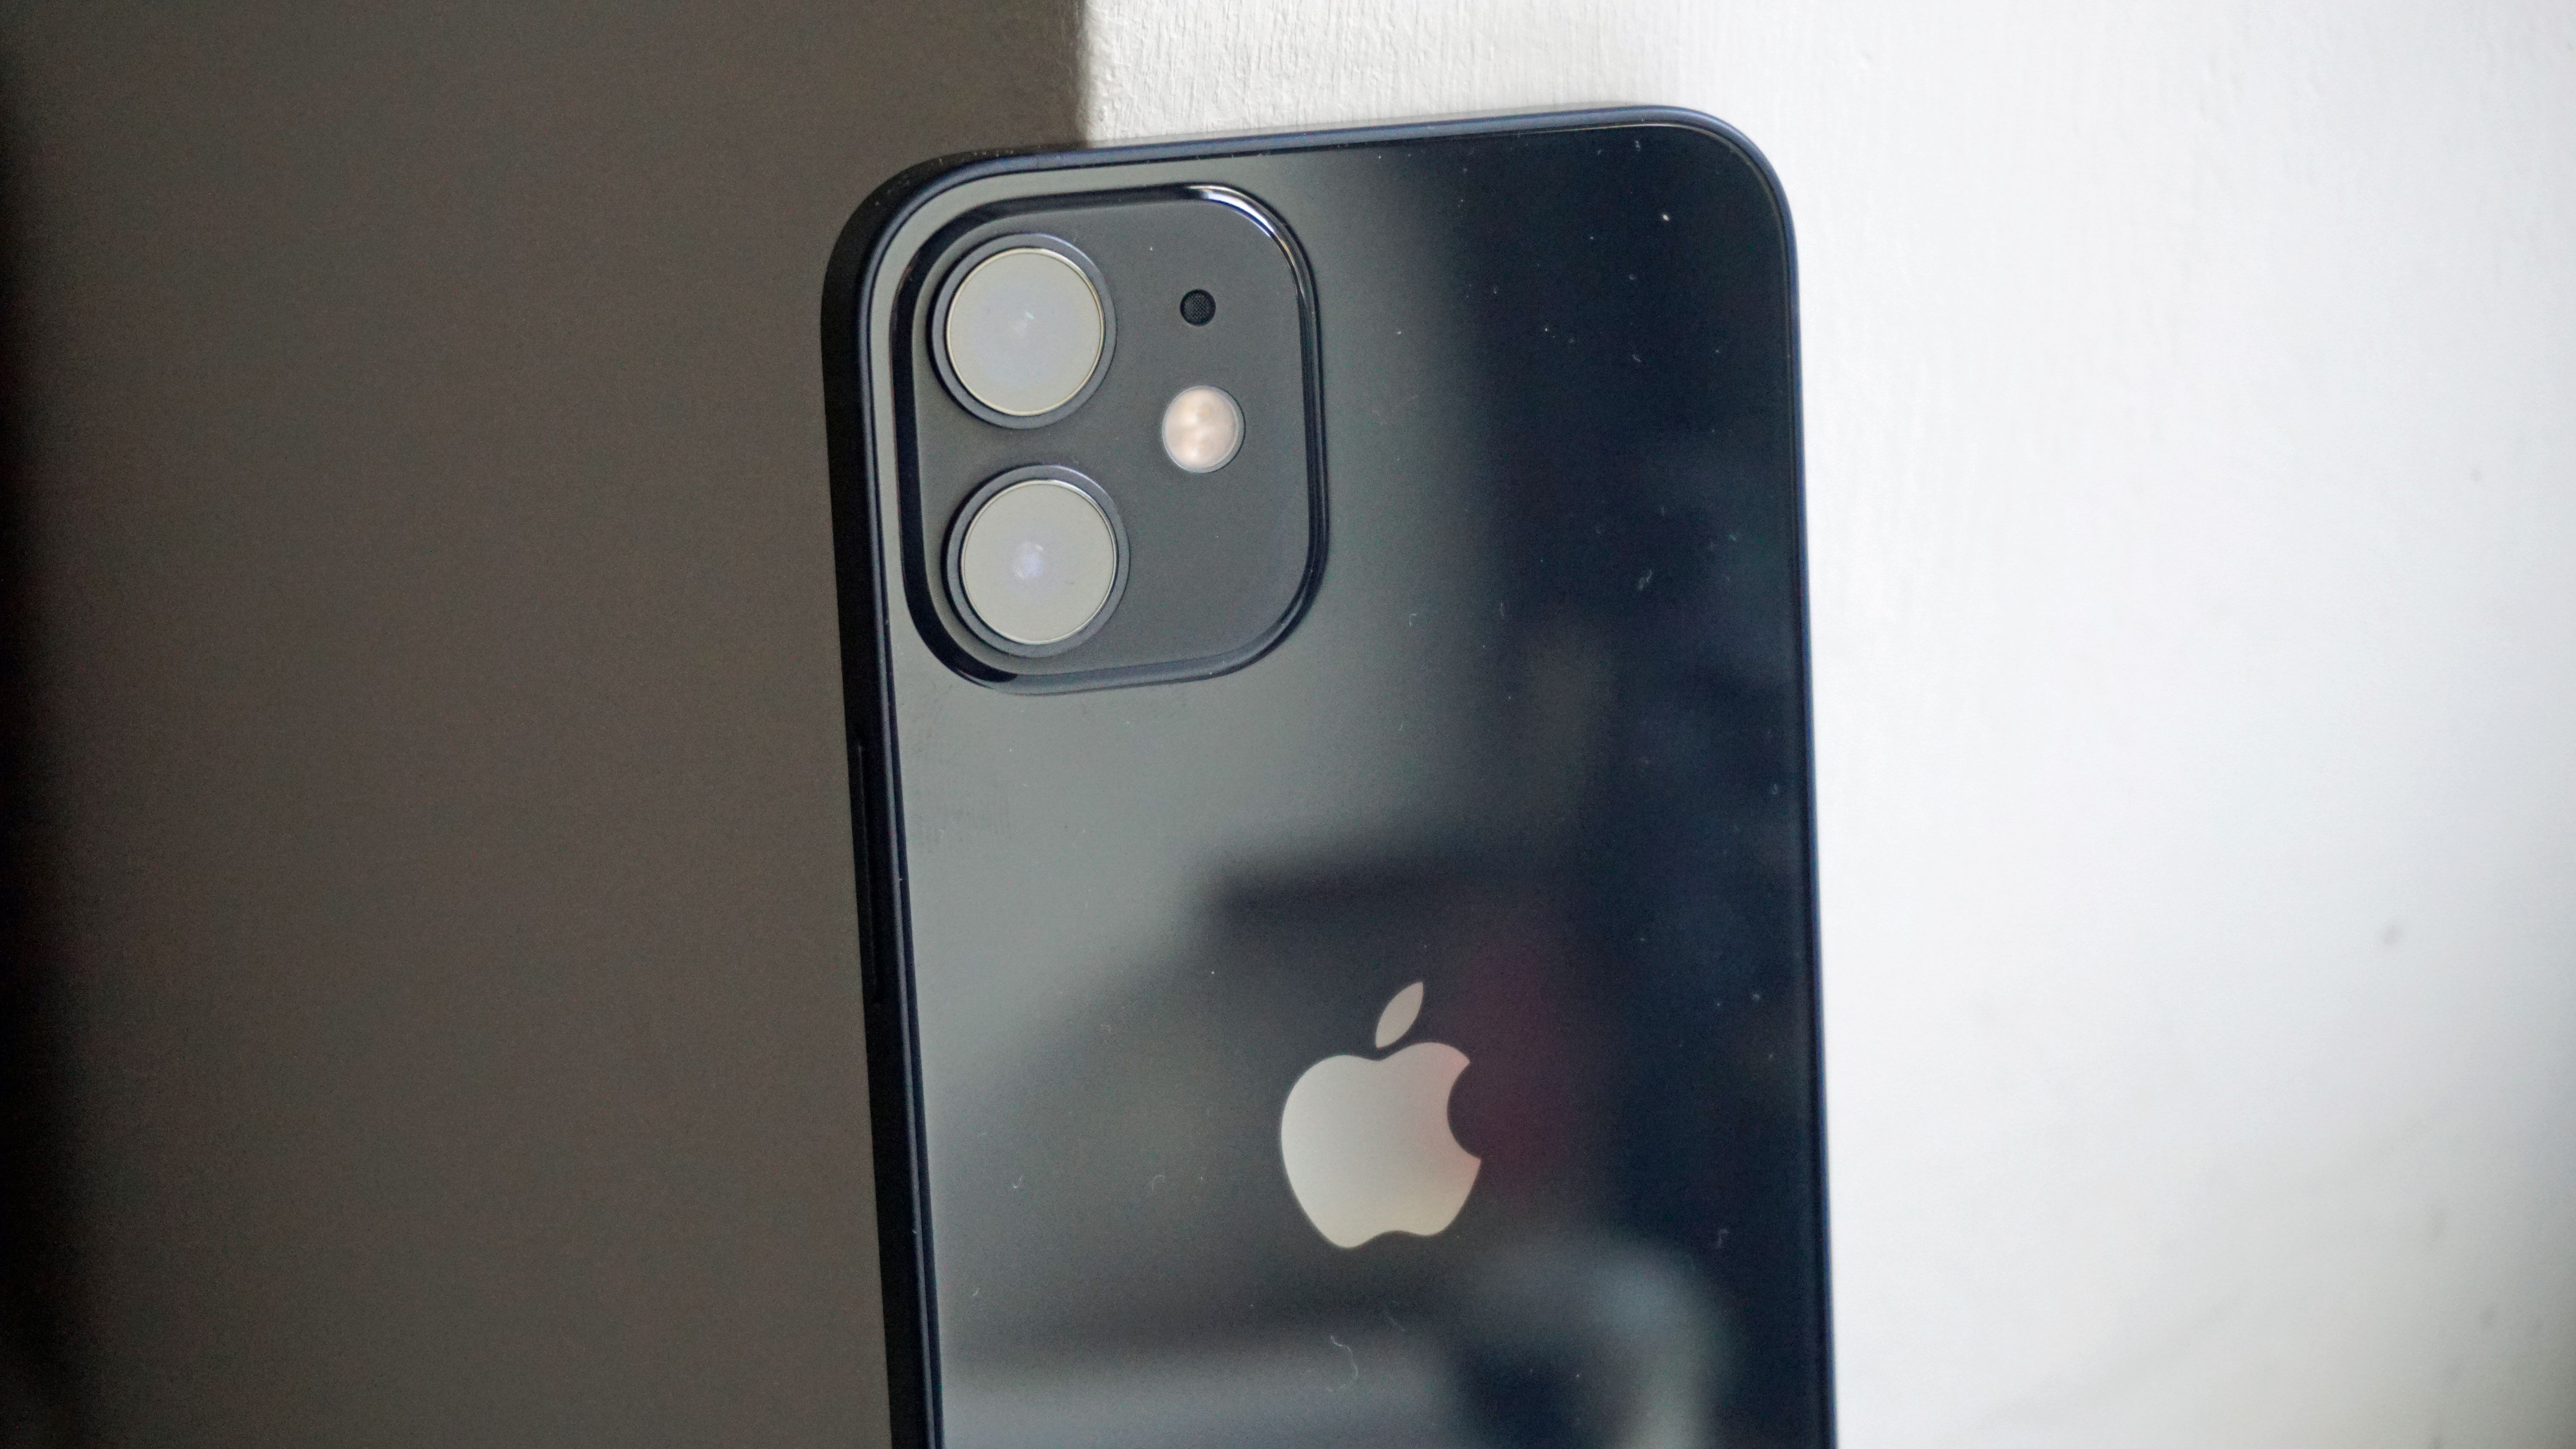 A close-up of the iPhone 12 mini's cameras